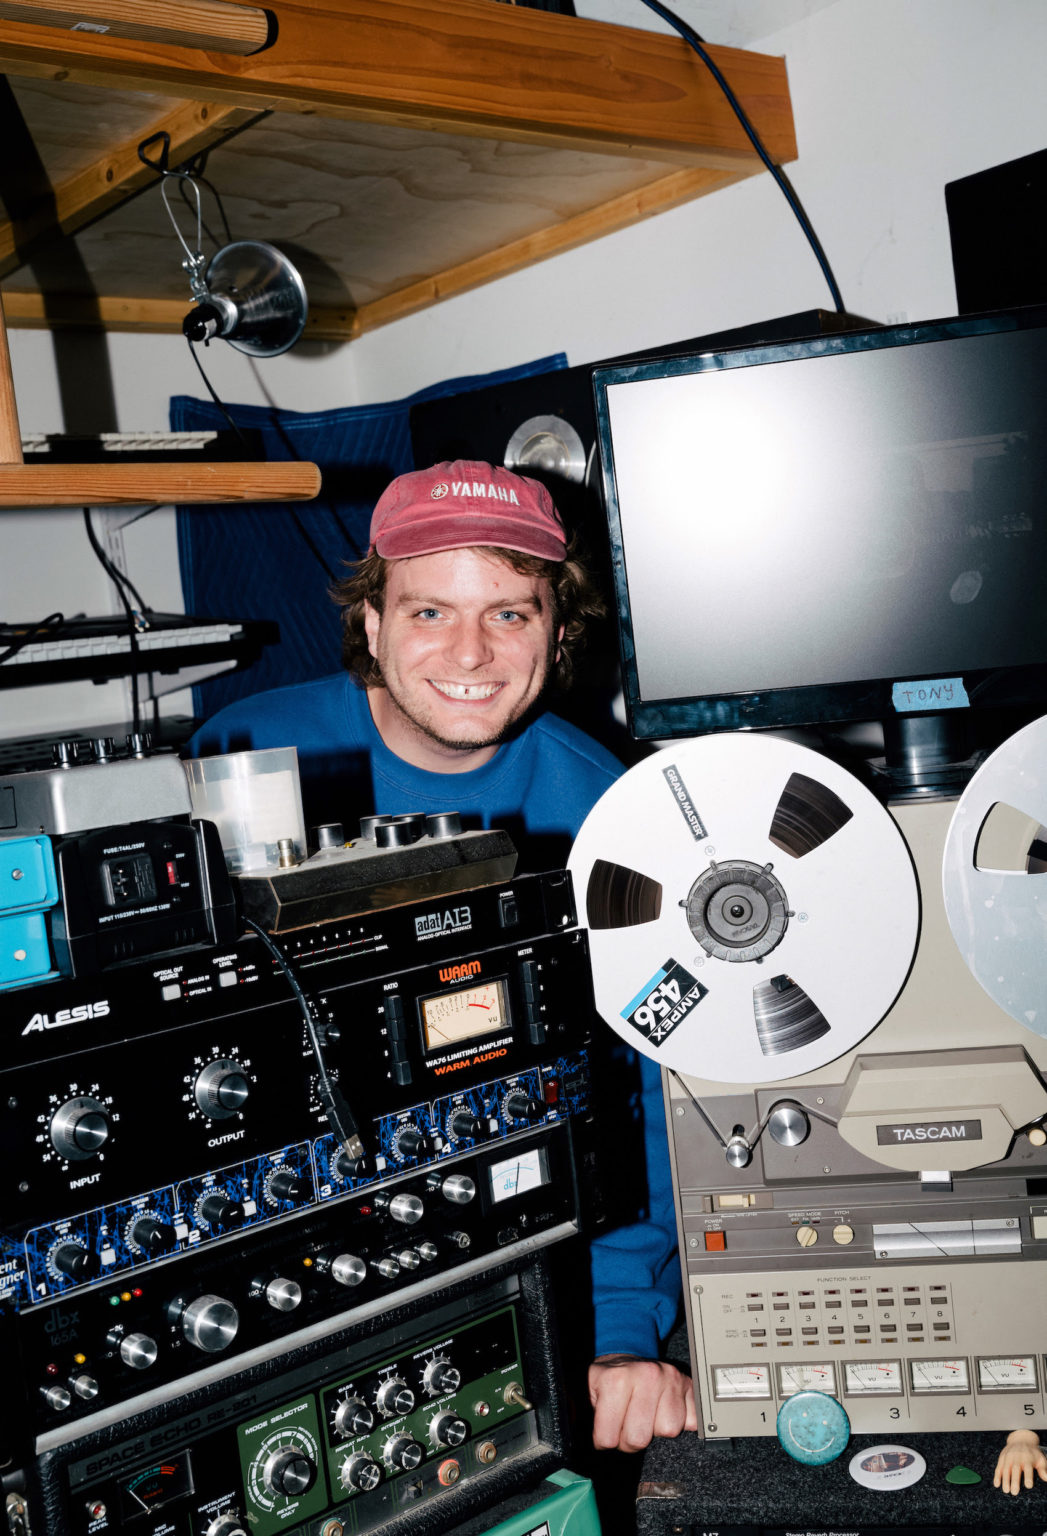 Mac DeMarco has announce two new demo albums; Here Comes The Cowboy Demos